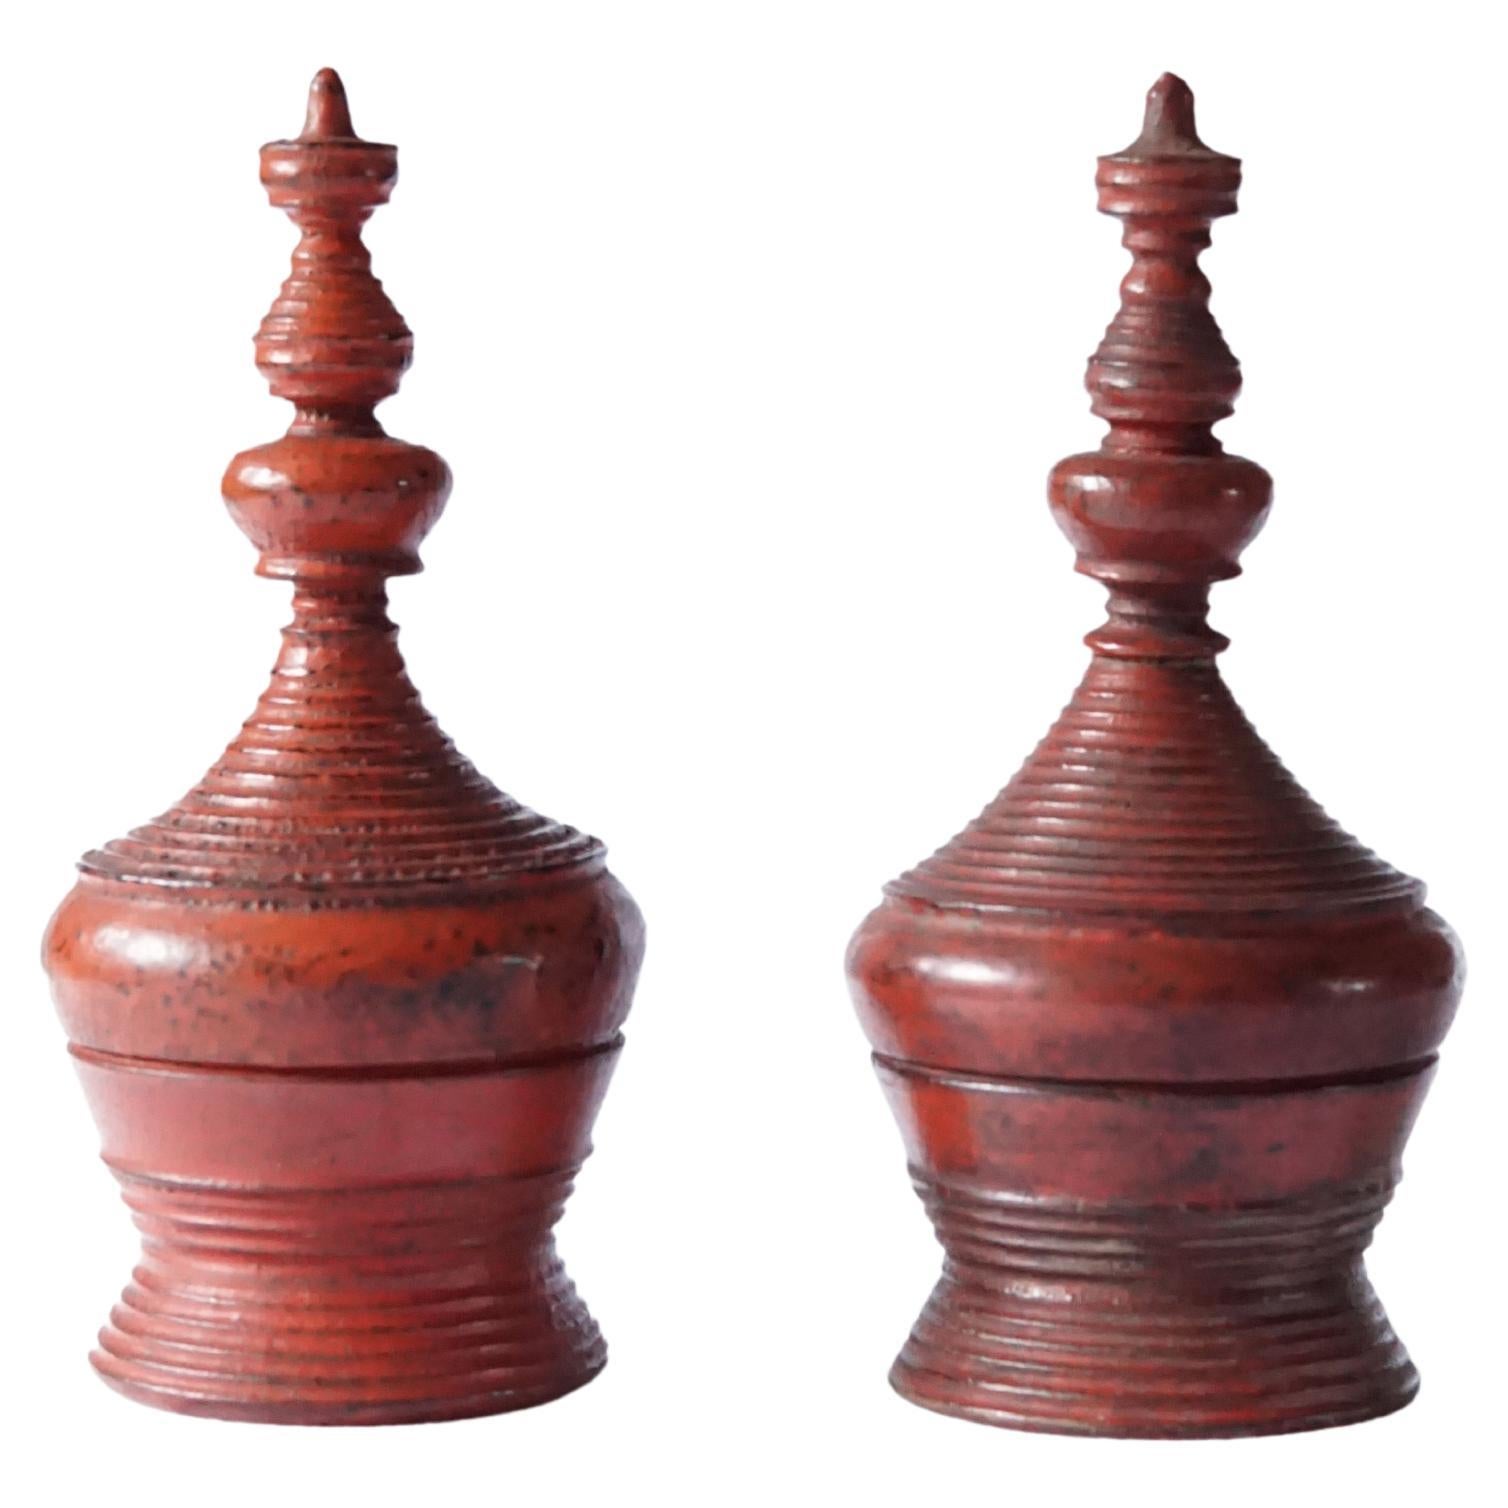 Pair of Small Burmese Lacquer Offering Vessels, "Hsun Ok", c. 1900